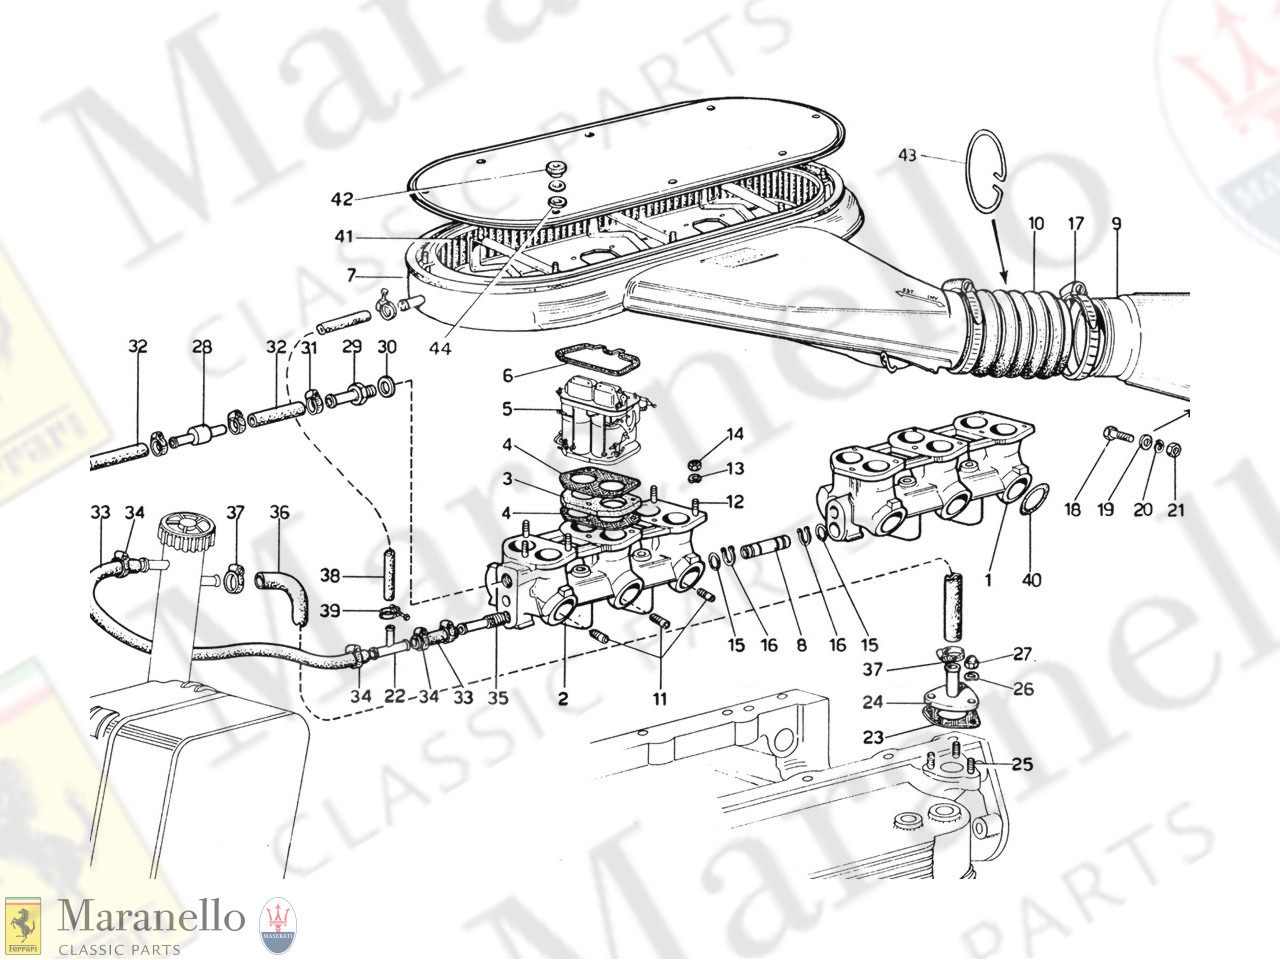 011A - Intake Manifolds - Air Intake (1974 Revision - Cars With Air Pollution System)